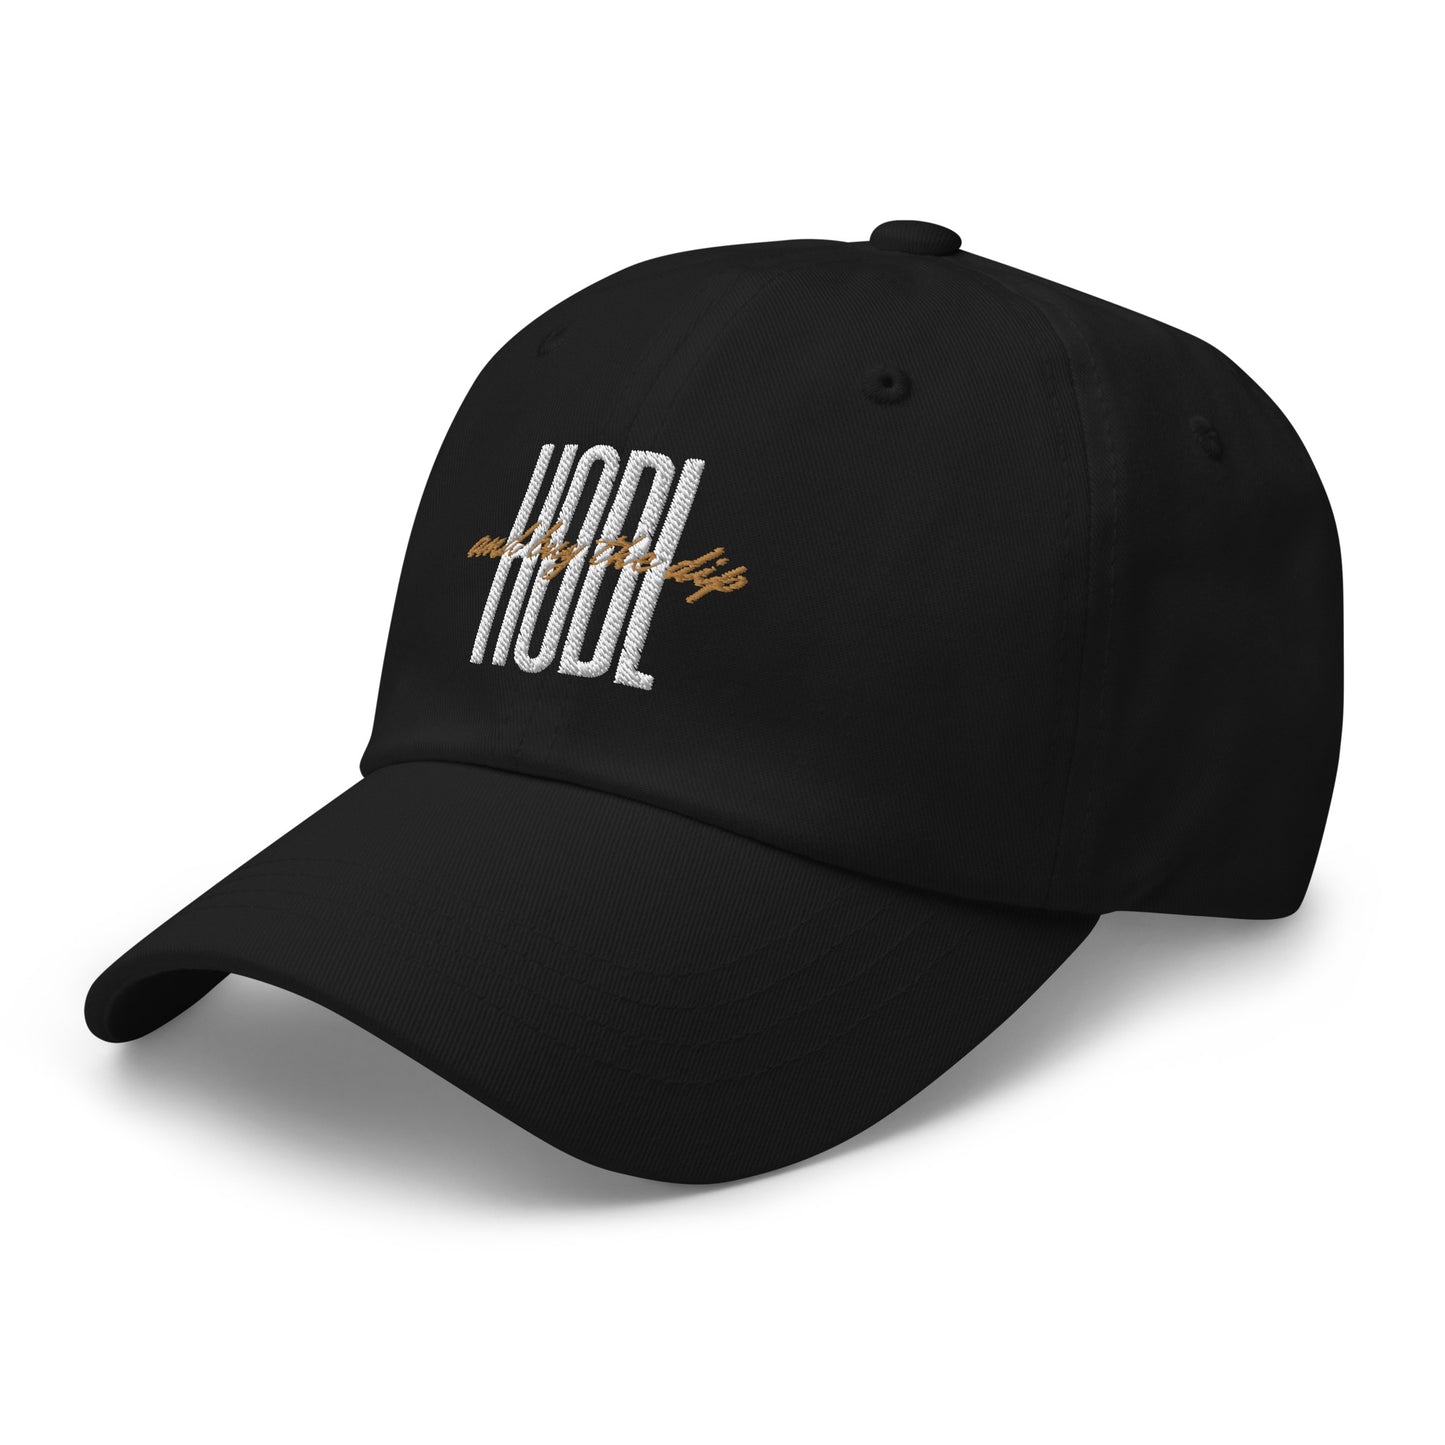 HODL AND BUY THE DIP Comfort Basecap